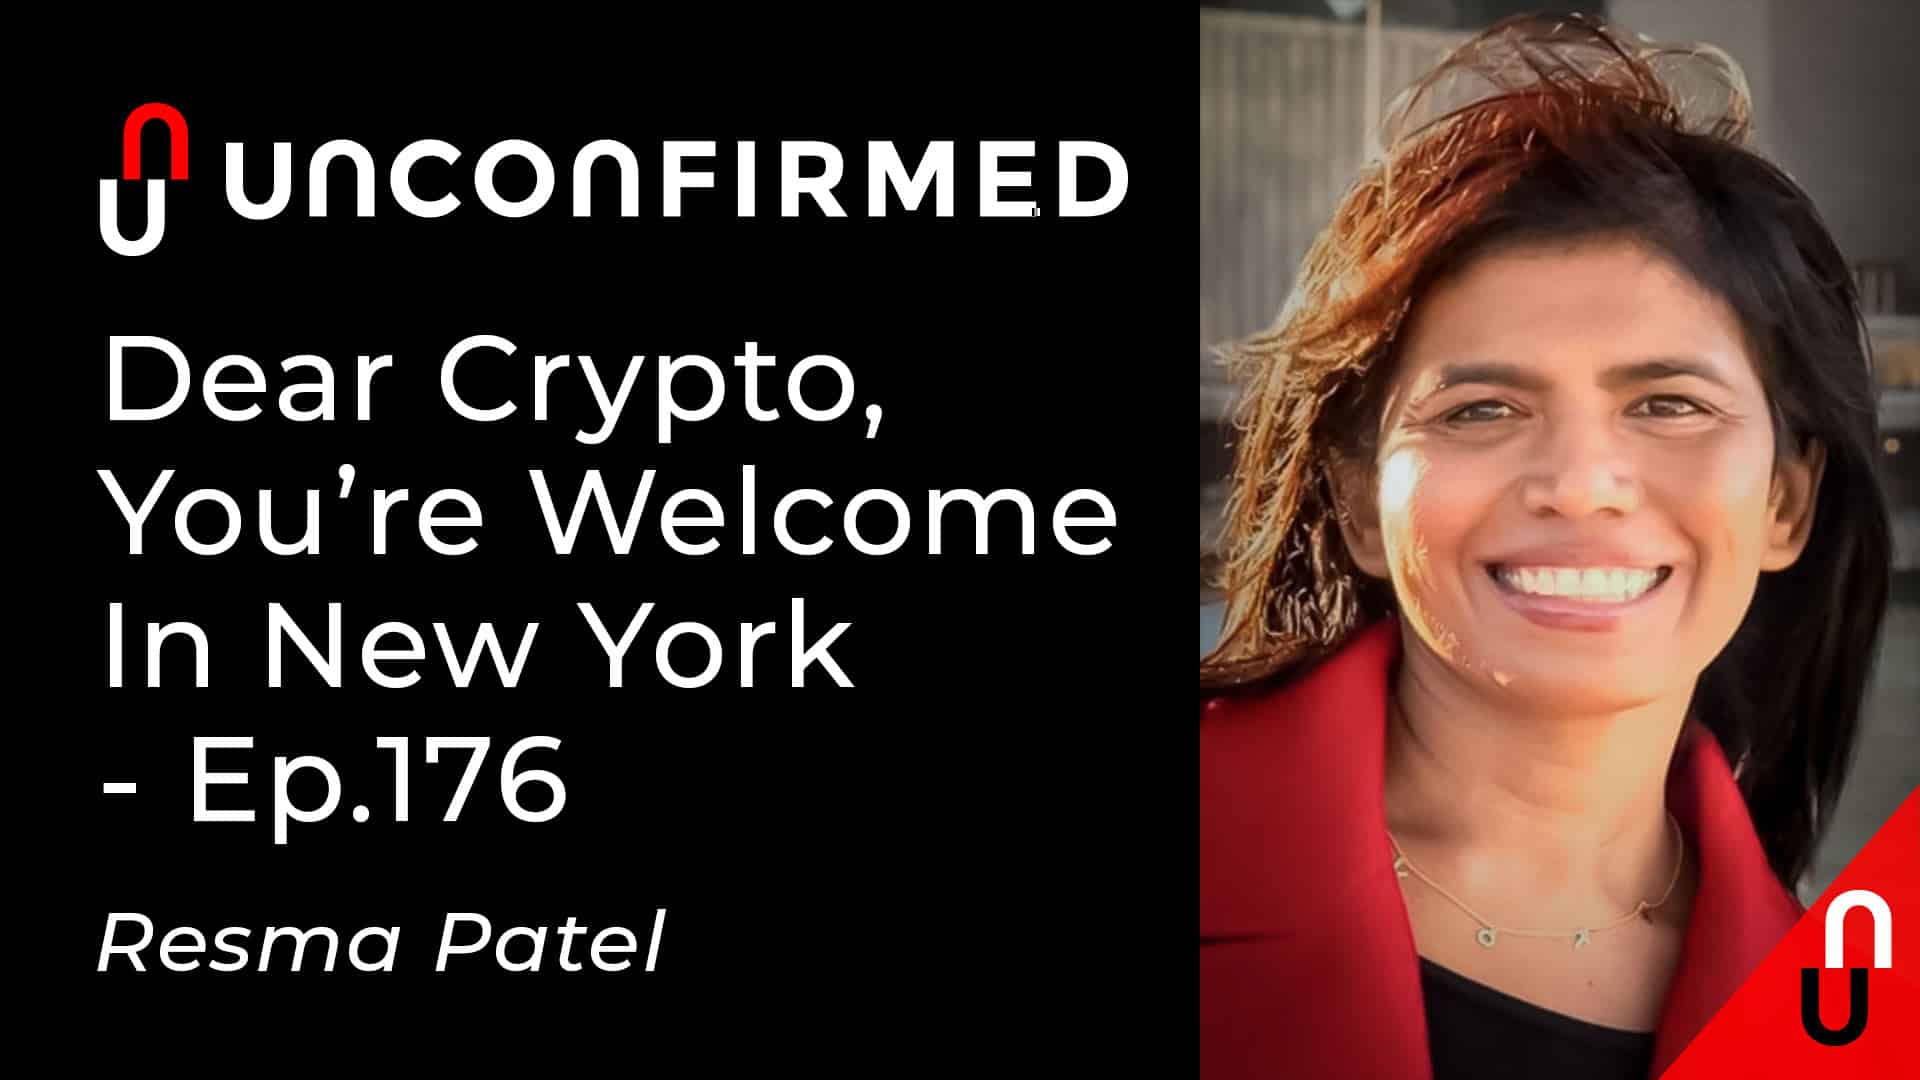 Unconfirmed - Ep.176 - Dear Crypto, You’re Welcome In New York